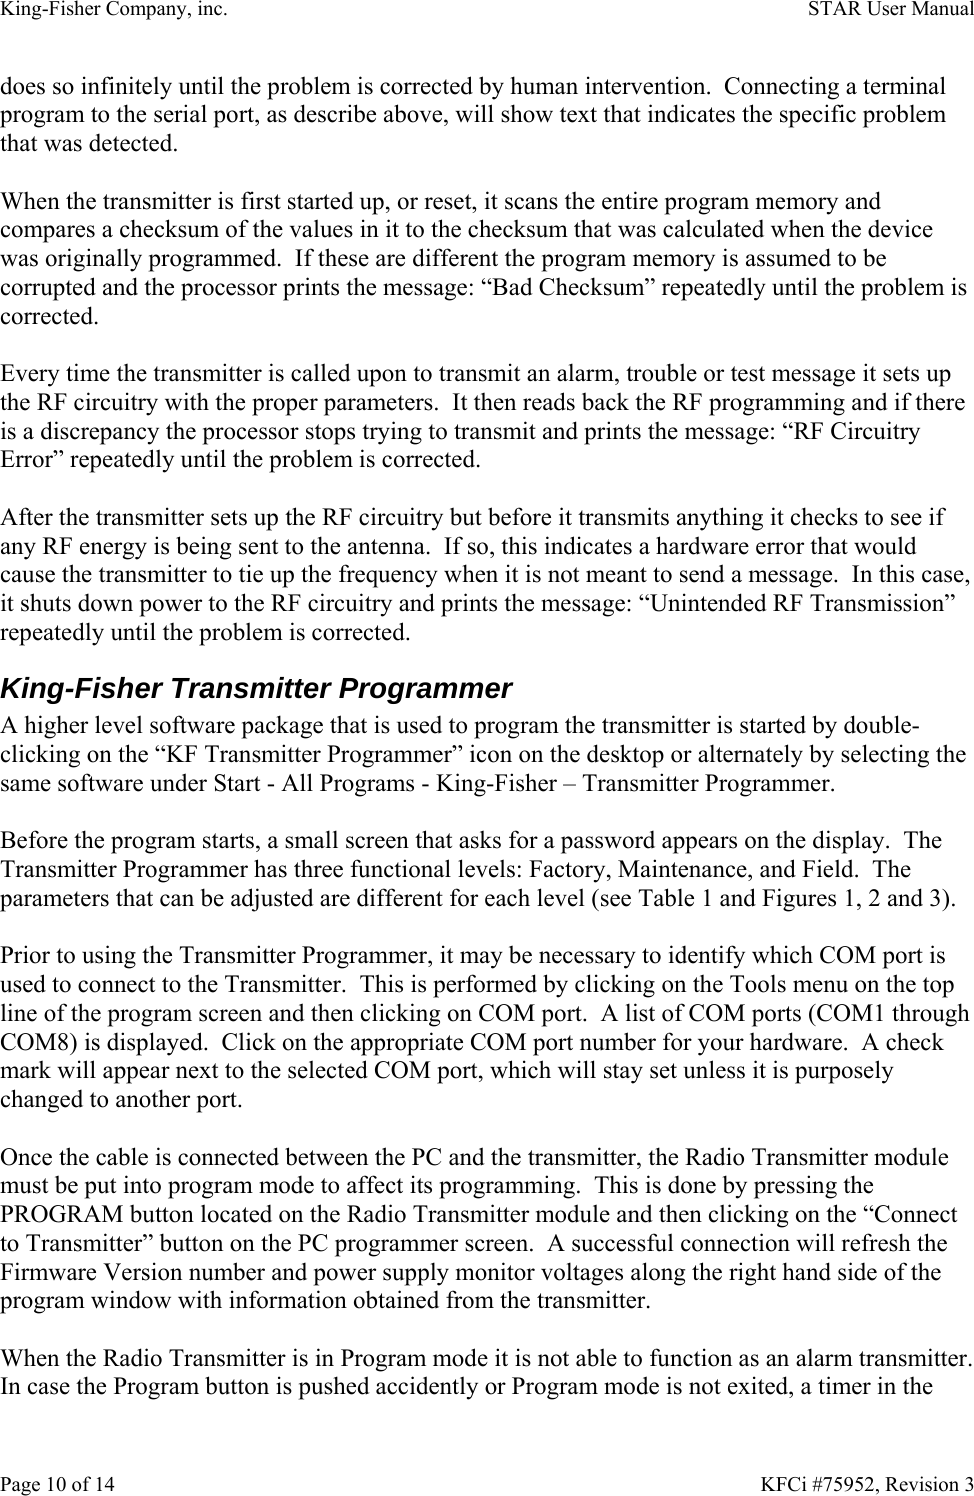 King-Fisher Company, inc.    STAR User Manual Page 10 of 14    KFCi #75952, Revision 3 does so infinitely until the problem is corrected by human intervention.  Connecting a terminal program to the serial port, as describe above, will show text that indicates the specific problem that was detected.  When the transmitter is first started up, or reset, it scans the entire program memory and compares a checksum of the values in it to the checksum that was calculated when the device was originally programmed.  If these are different the program memory is assumed to be corrupted and the processor prints the message: “Bad Checksum” repeatedly until the problem is corrected.  Every time the transmitter is called upon to transmit an alarm, trouble or test message it sets up the RF circuitry with the proper parameters.  It then reads back the RF programming and if there is a discrepancy the processor stops trying to transmit and prints the message: “RF Circuitry Error” repeatedly until the problem is corrected.  After the transmitter sets up the RF circuitry but before it transmits anything it checks to see if any RF energy is being sent to the antenna.  If so, this indicates a hardware error that would cause the transmitter to tie up the frequency when it is not meant to send a message.  In this case, it shuts down power to the RF circuitry and prints the message: “Unintended RF Transmission” repeatedly until the problem is corrected. King-Fisher Transmitter Programmer A higher level software package that is used to program the transmitter is started by double-clicking on the “KF Transmitter Programmer” icon on the desktop or alternately by selecting the same software under Start - All Programs - King-Fisher – Transmitter Programmer.  Before the program starts, a small screen that asks for a password appears on the display.  The Transmitter Programmer has three functional levels: Factory, Maintenance, and Field.  The parameters that can be adjusted are different for each level (see Table 1 and Figures 1, 2 and 3).  Prior to using the Transmitter Programmer, it may be necessary to identify which COM port is used to connect to the Transmitter.  This is performed by clicking on the Tools menu on the top line of the program screen and then clicking on COM port.  A list of COM ports (COM1 through COM8) is displayed.  Click on the appropriate COM port number for your hardware.  A check mark will appear next to the selected COM port, which will stay set unless it is purposely changed to another port.  Once the cable is connected between the PC and the transmitter, the Radio Transmitter module must be put into program mode to affect its programming.  This is done by pressing the PROGRAM button located on the Radio Transmitter module and then clicking on the “Connect to Transmitter” button on the PC programmer screen.  A successful connection will refresh the Firmware Version number and power supply monitor voltages along the right hand side of the program window with information obtained from the transmitter.  When the Radio Transmitter is in Program mode it is not able to function as an alarm transmitter.  In case the Program button is pushed accidently or Program mode is not exited, a timer in the 